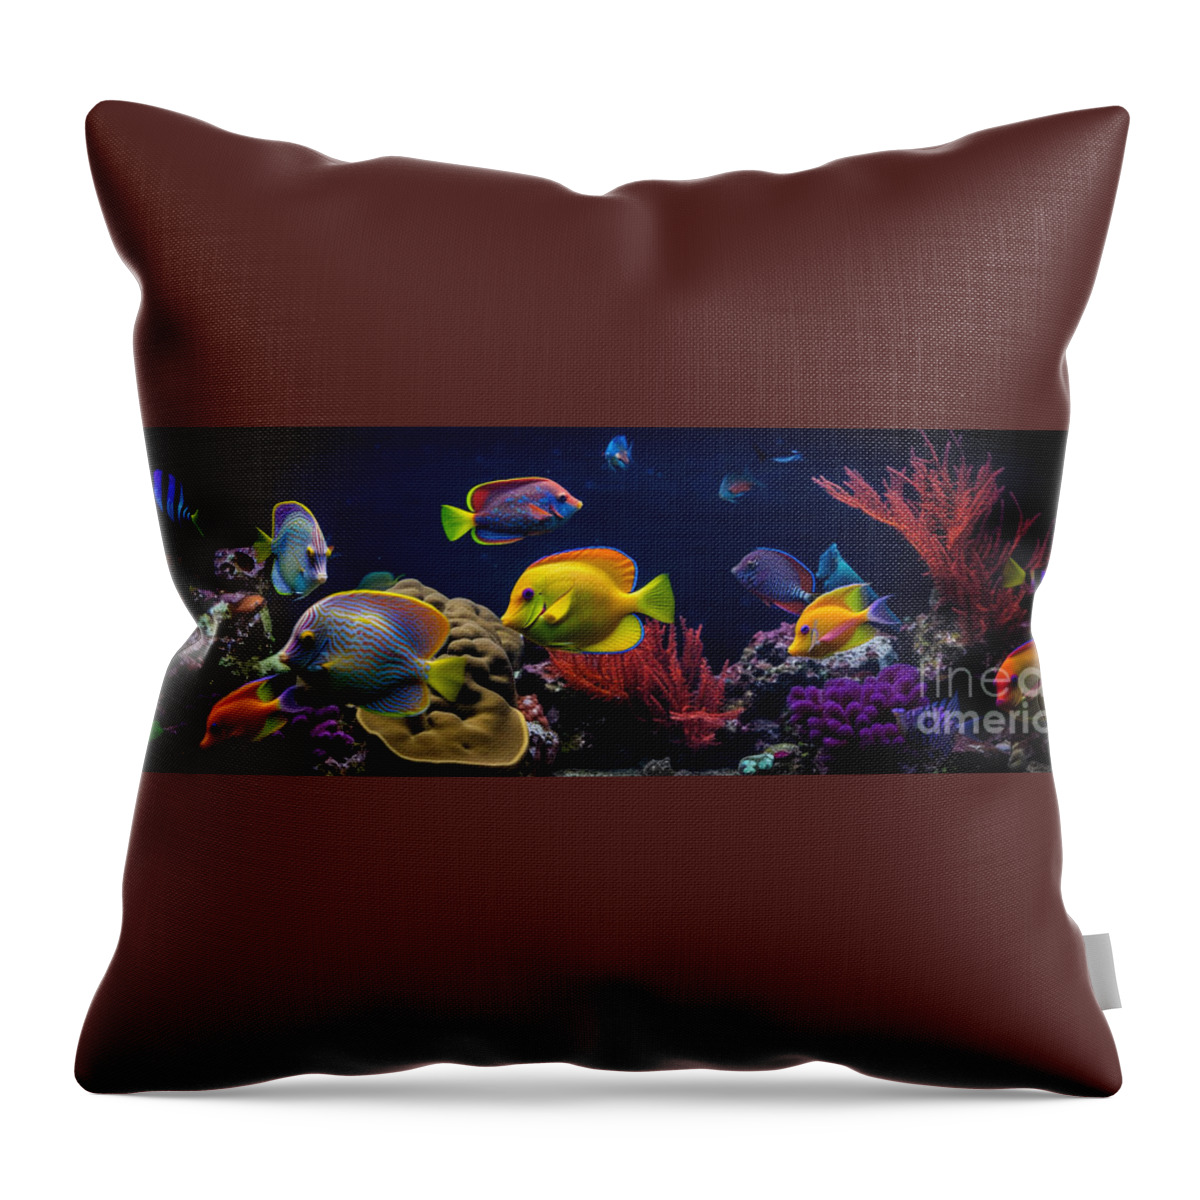 Tropical Throw Pillow featuring the digital art Tropical Fish III by Jay Schankman